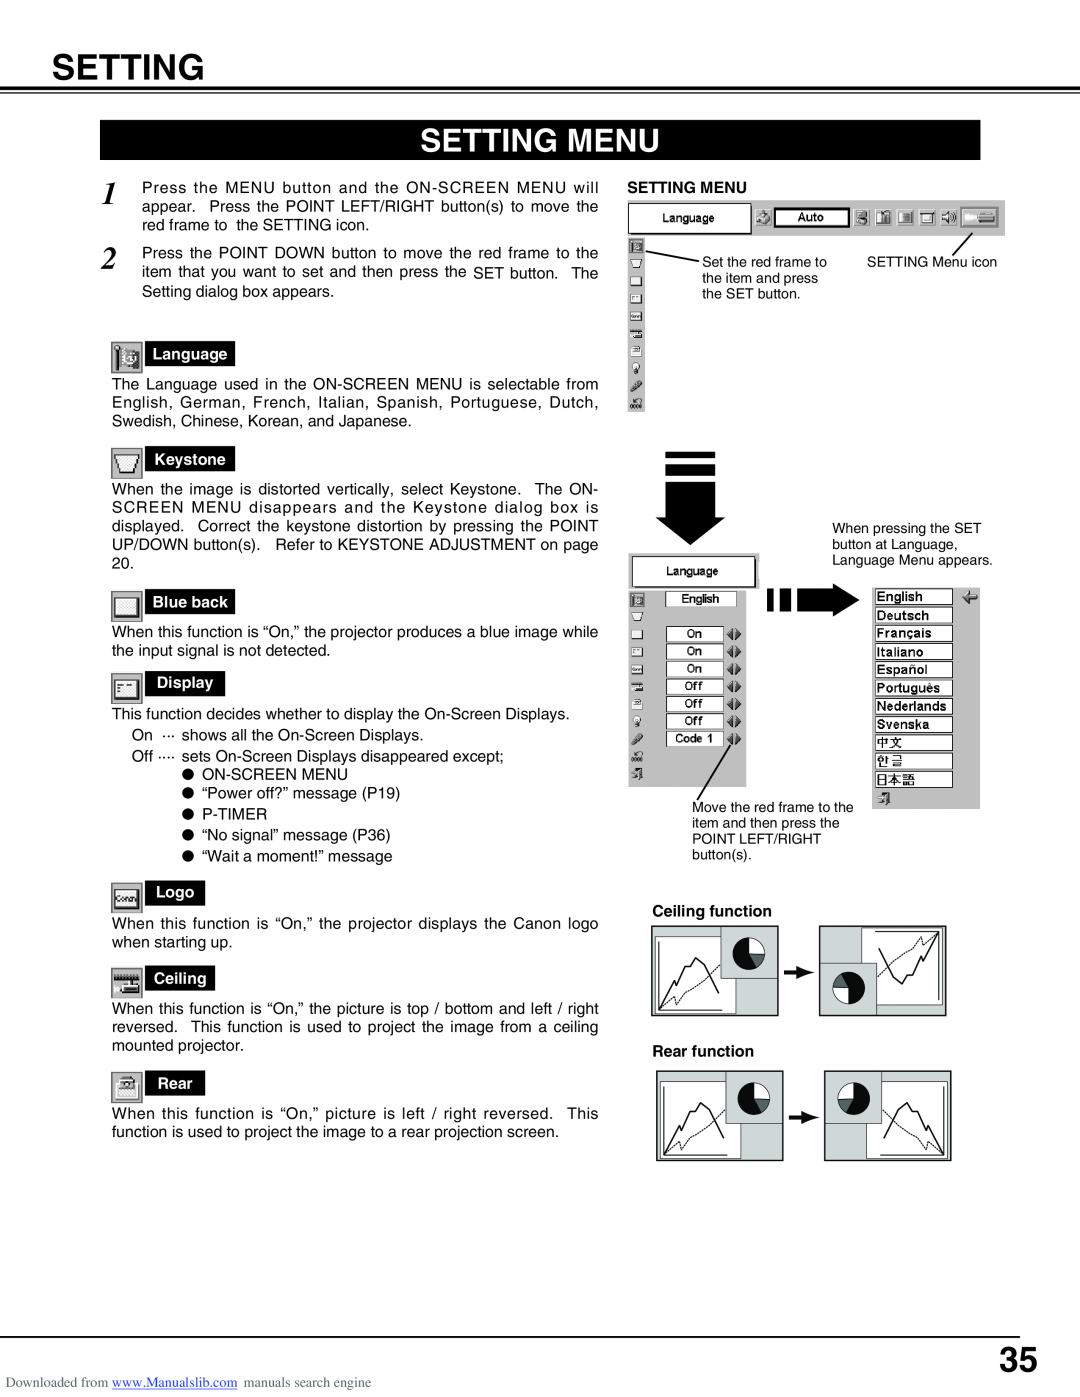 Canon LV-S2 owner manual Setting Menu, Ceiling function Rear function 